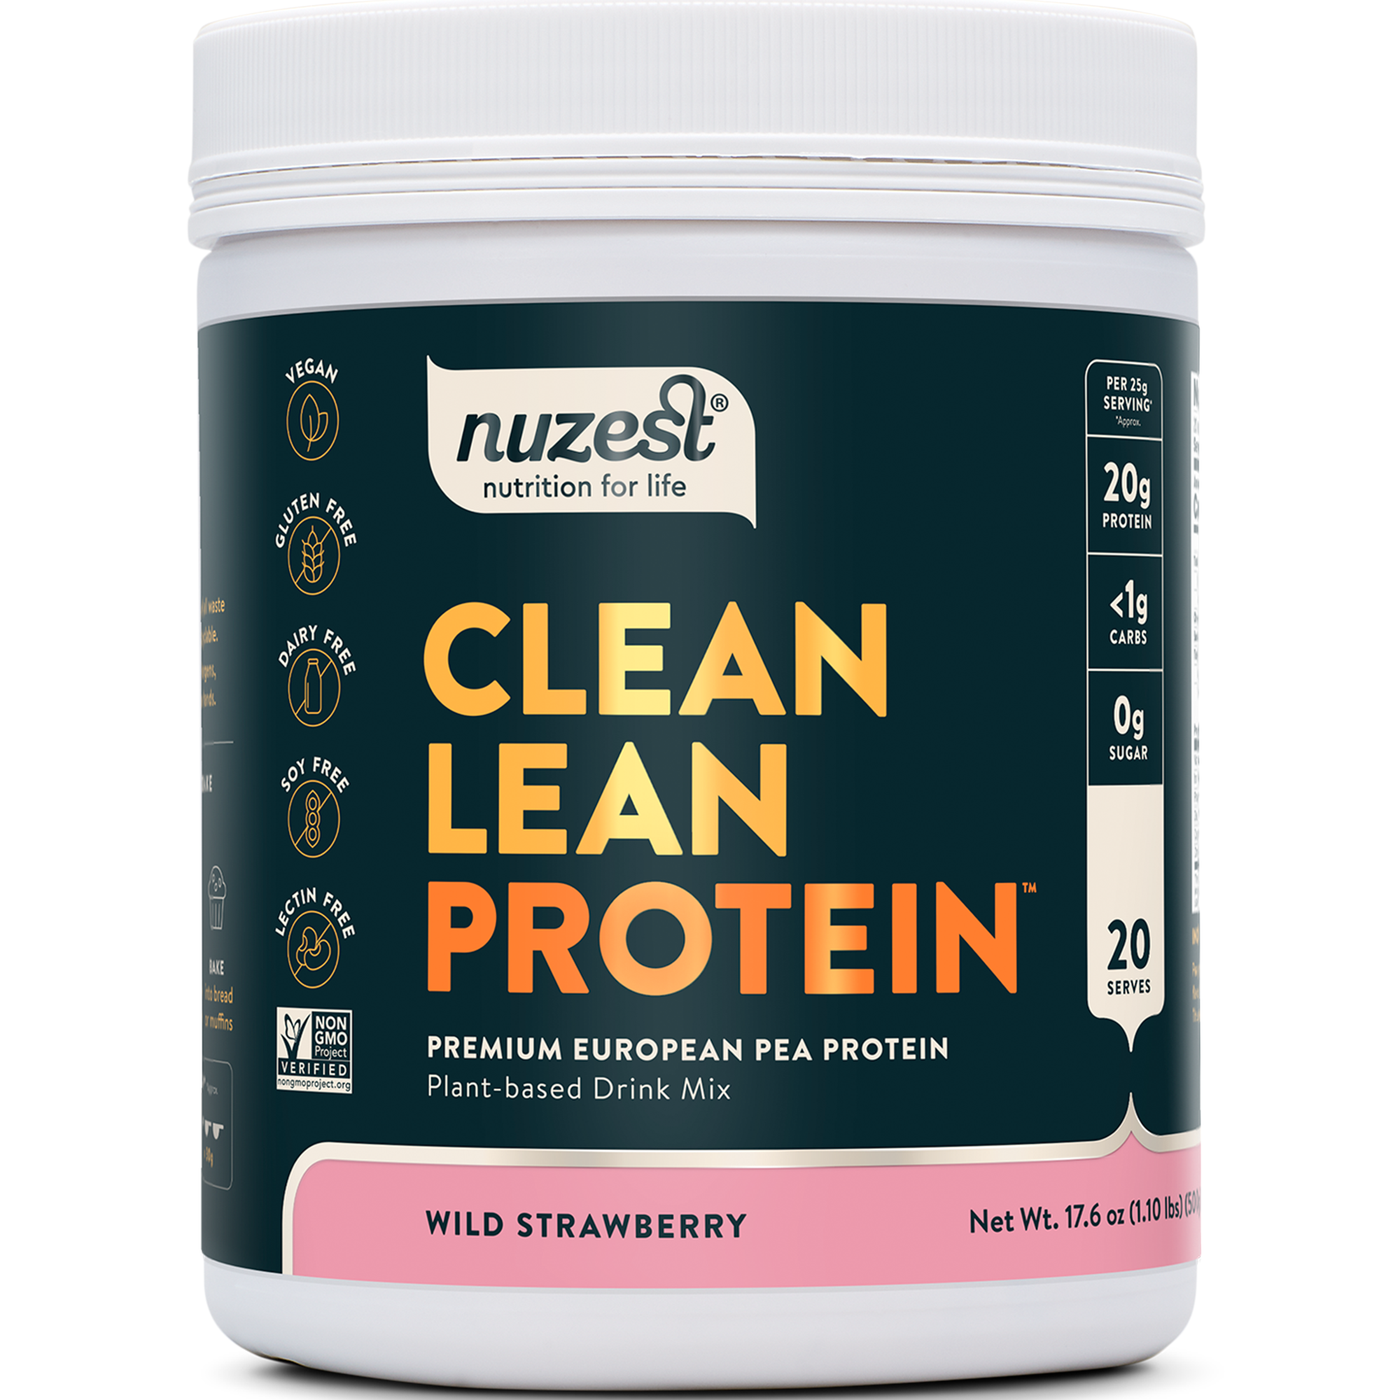 Clean Lean Protein Strawberry 20 srvings Curated Wellness